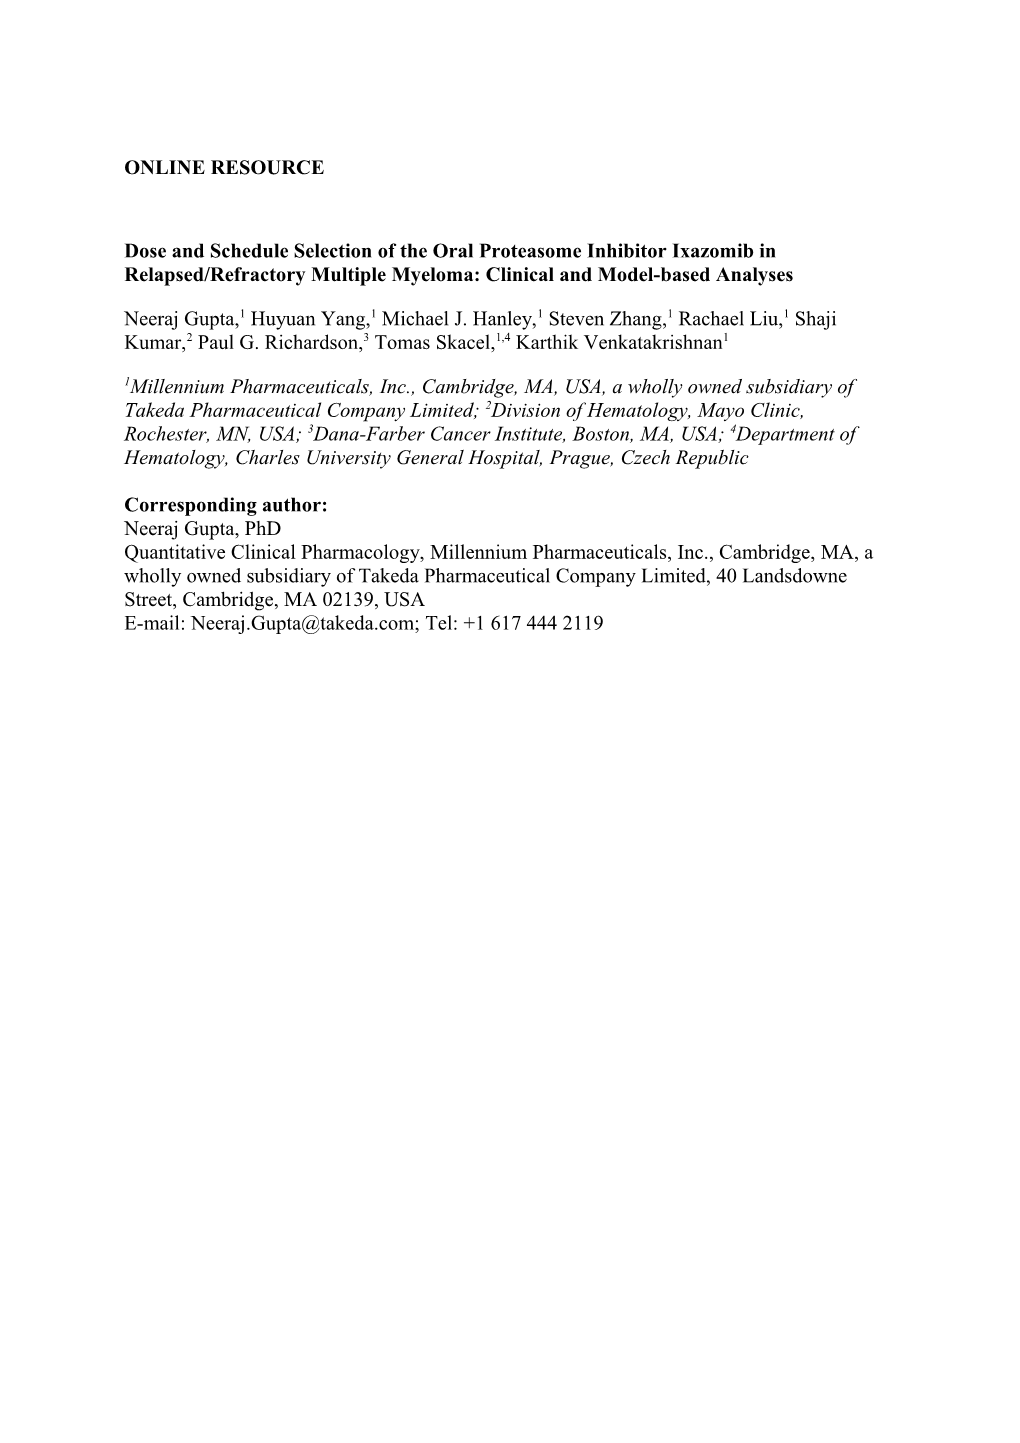 Dose and Schedule Selection of the Oral Proteasome Inhibitor Ixazomib in Relapsed/Refractory